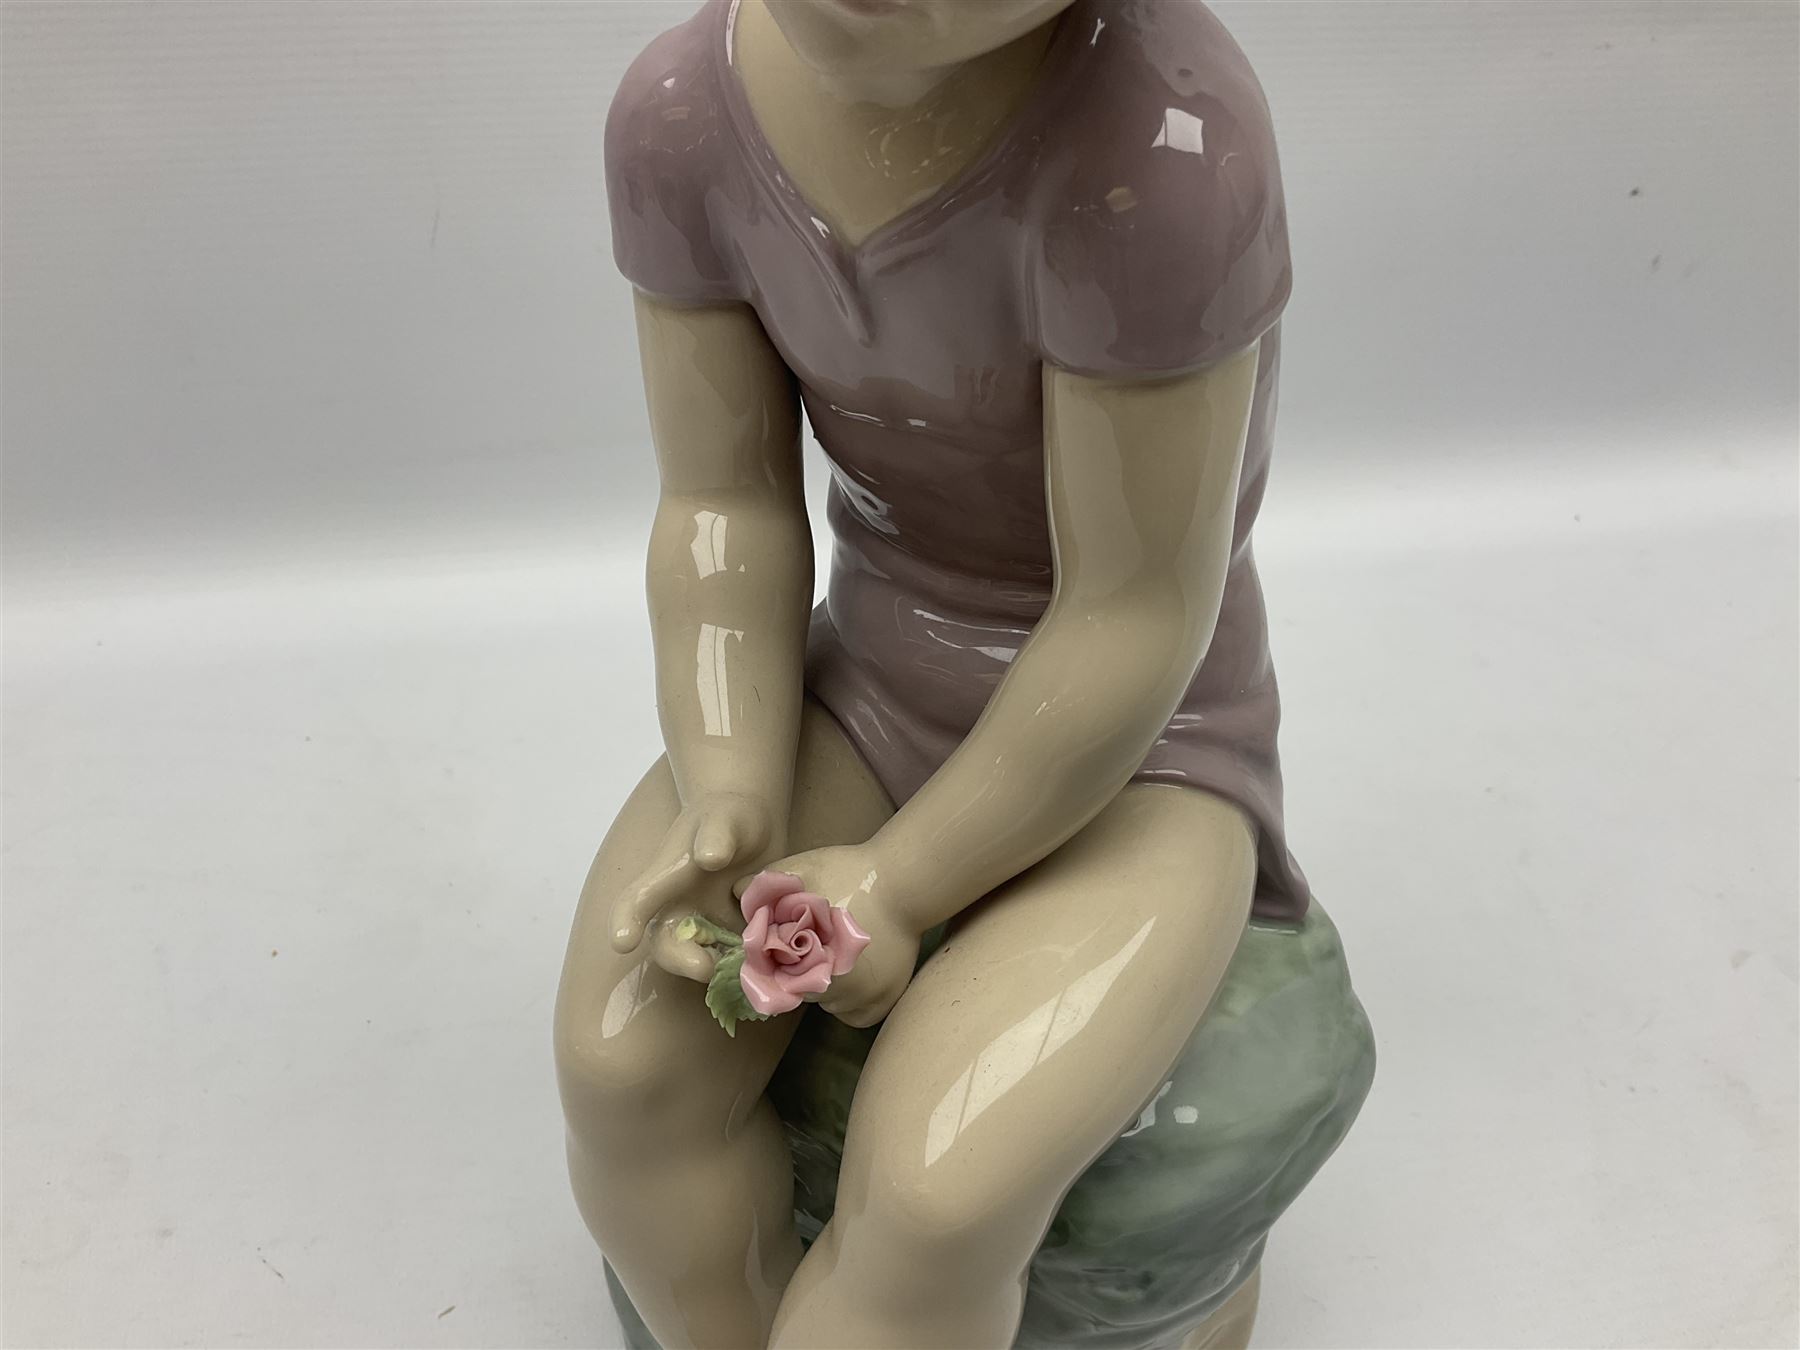 Large Nao figure modelled as a young girl seated upon a rock holding a rose - Image 3 of 7